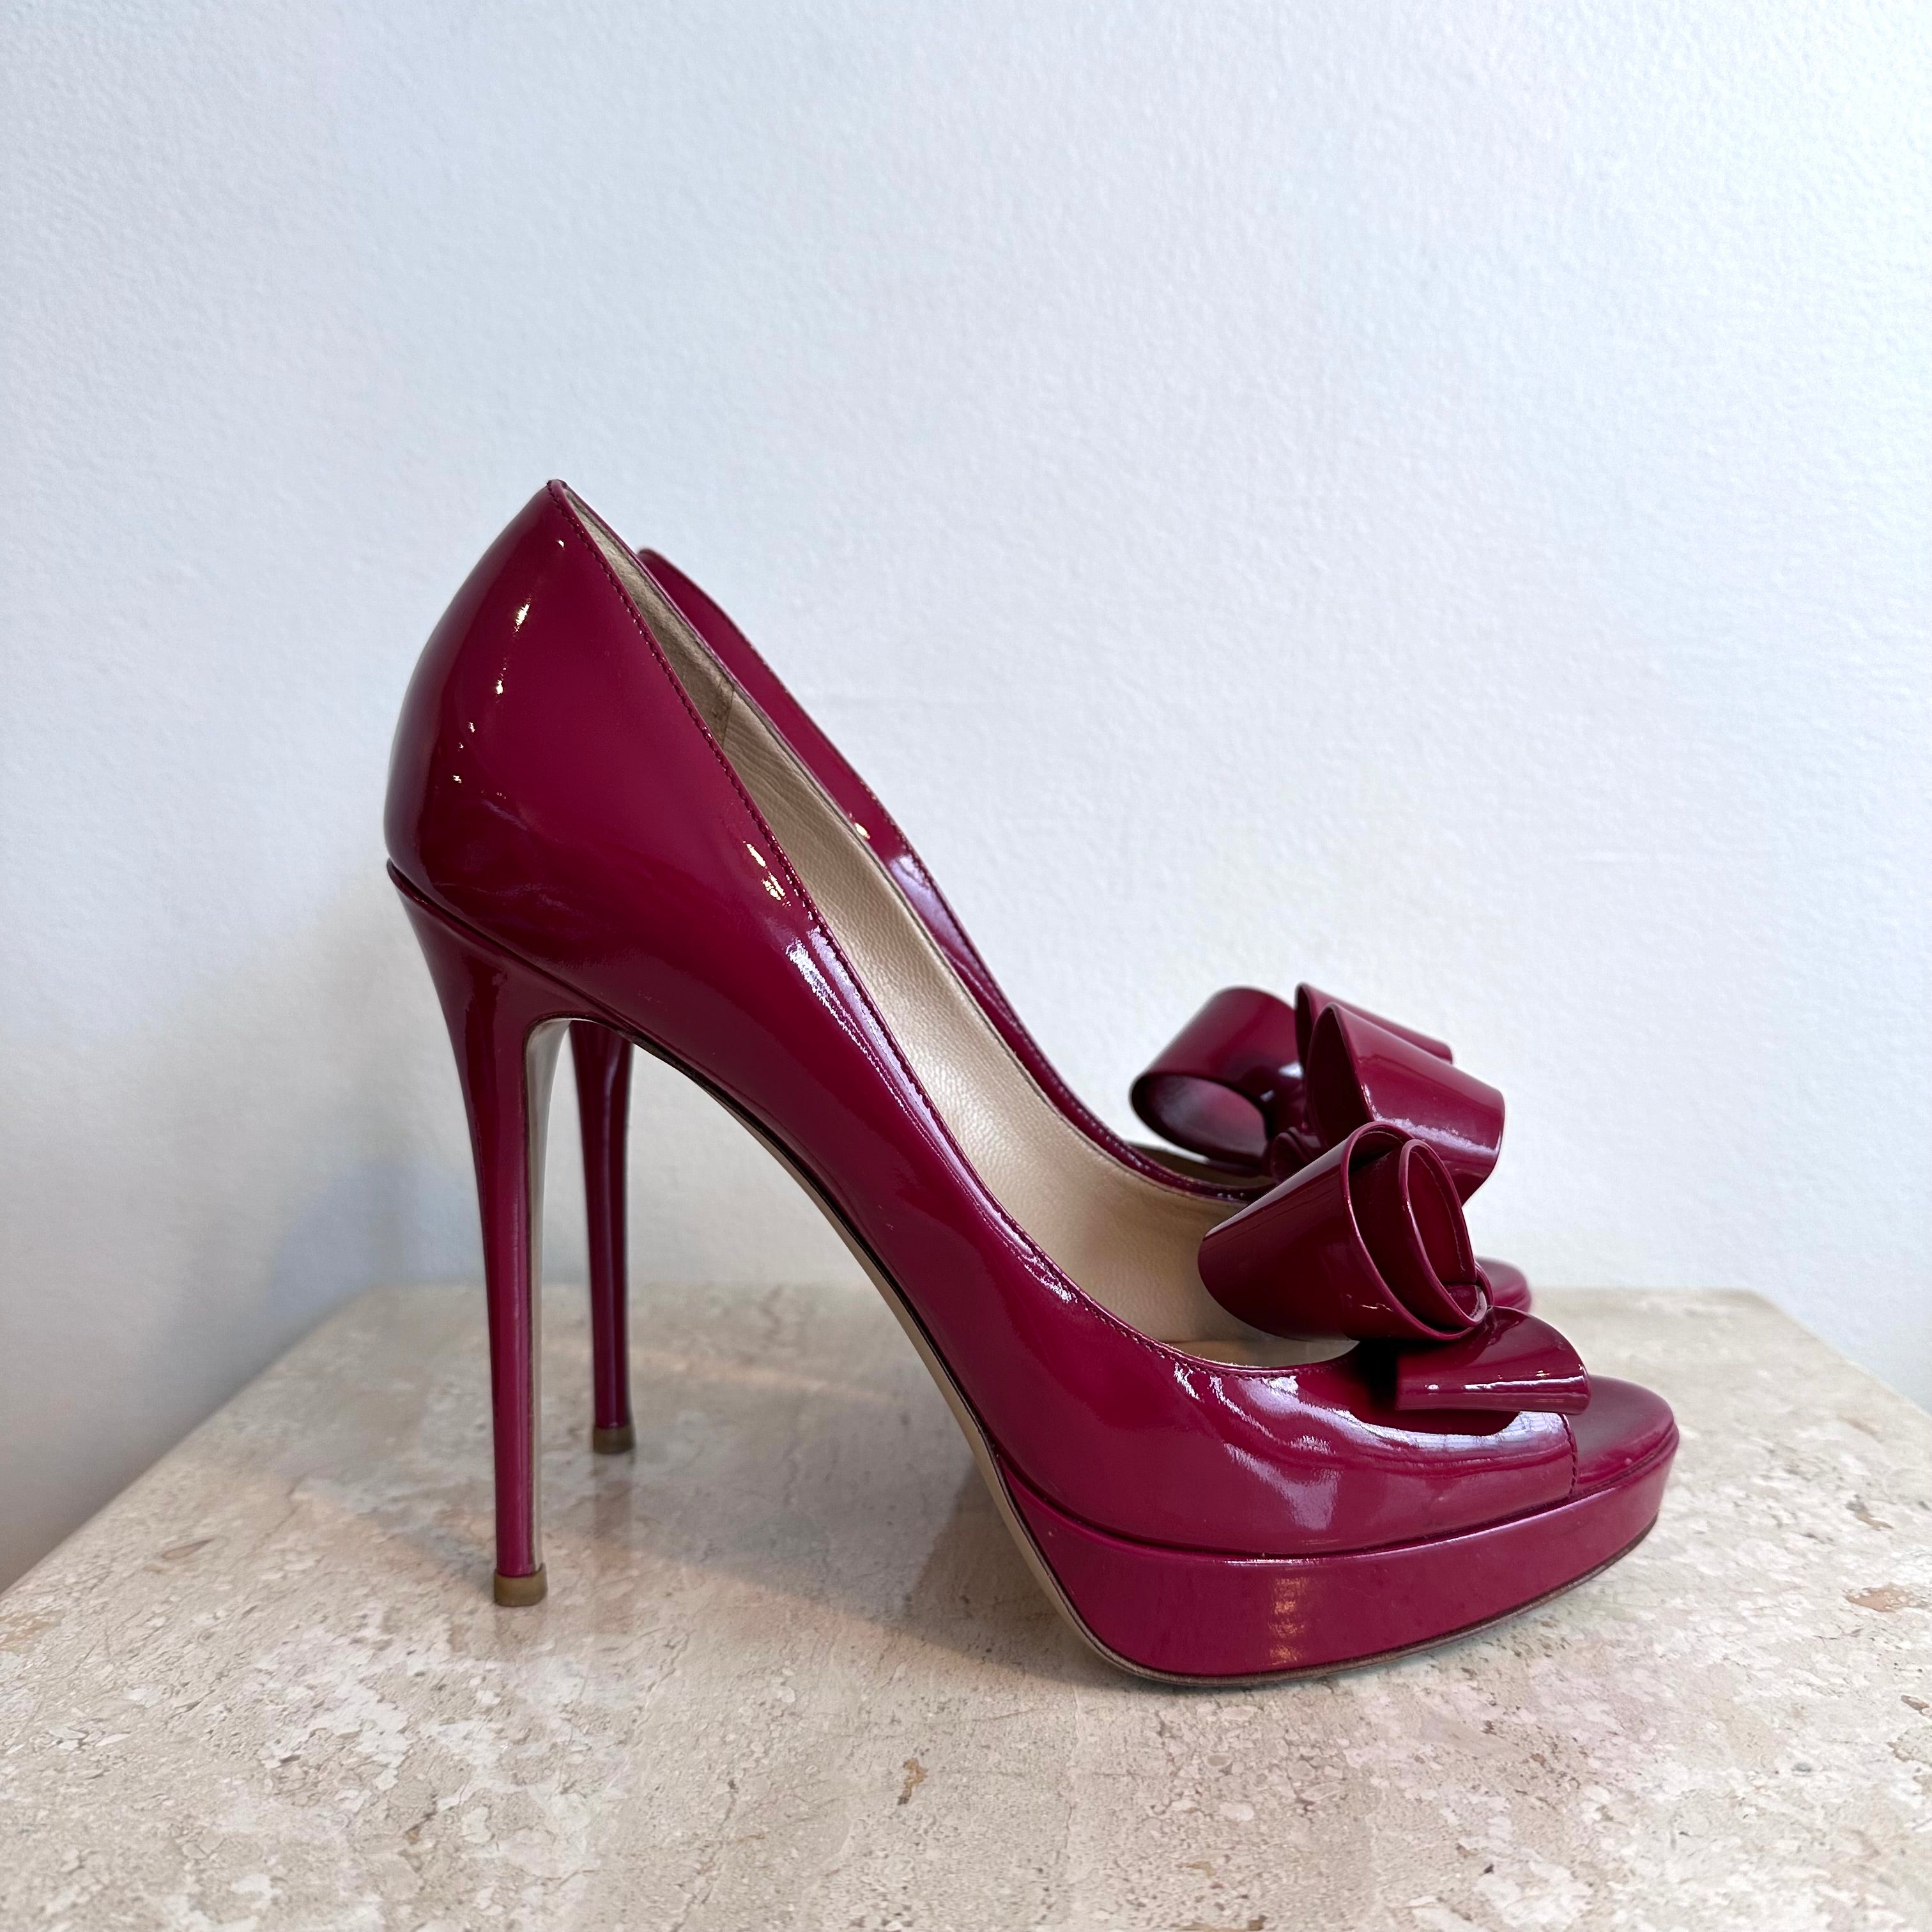 Pre-Owned VALENTINO Size 39 Bow Open Toe Platform Shoes